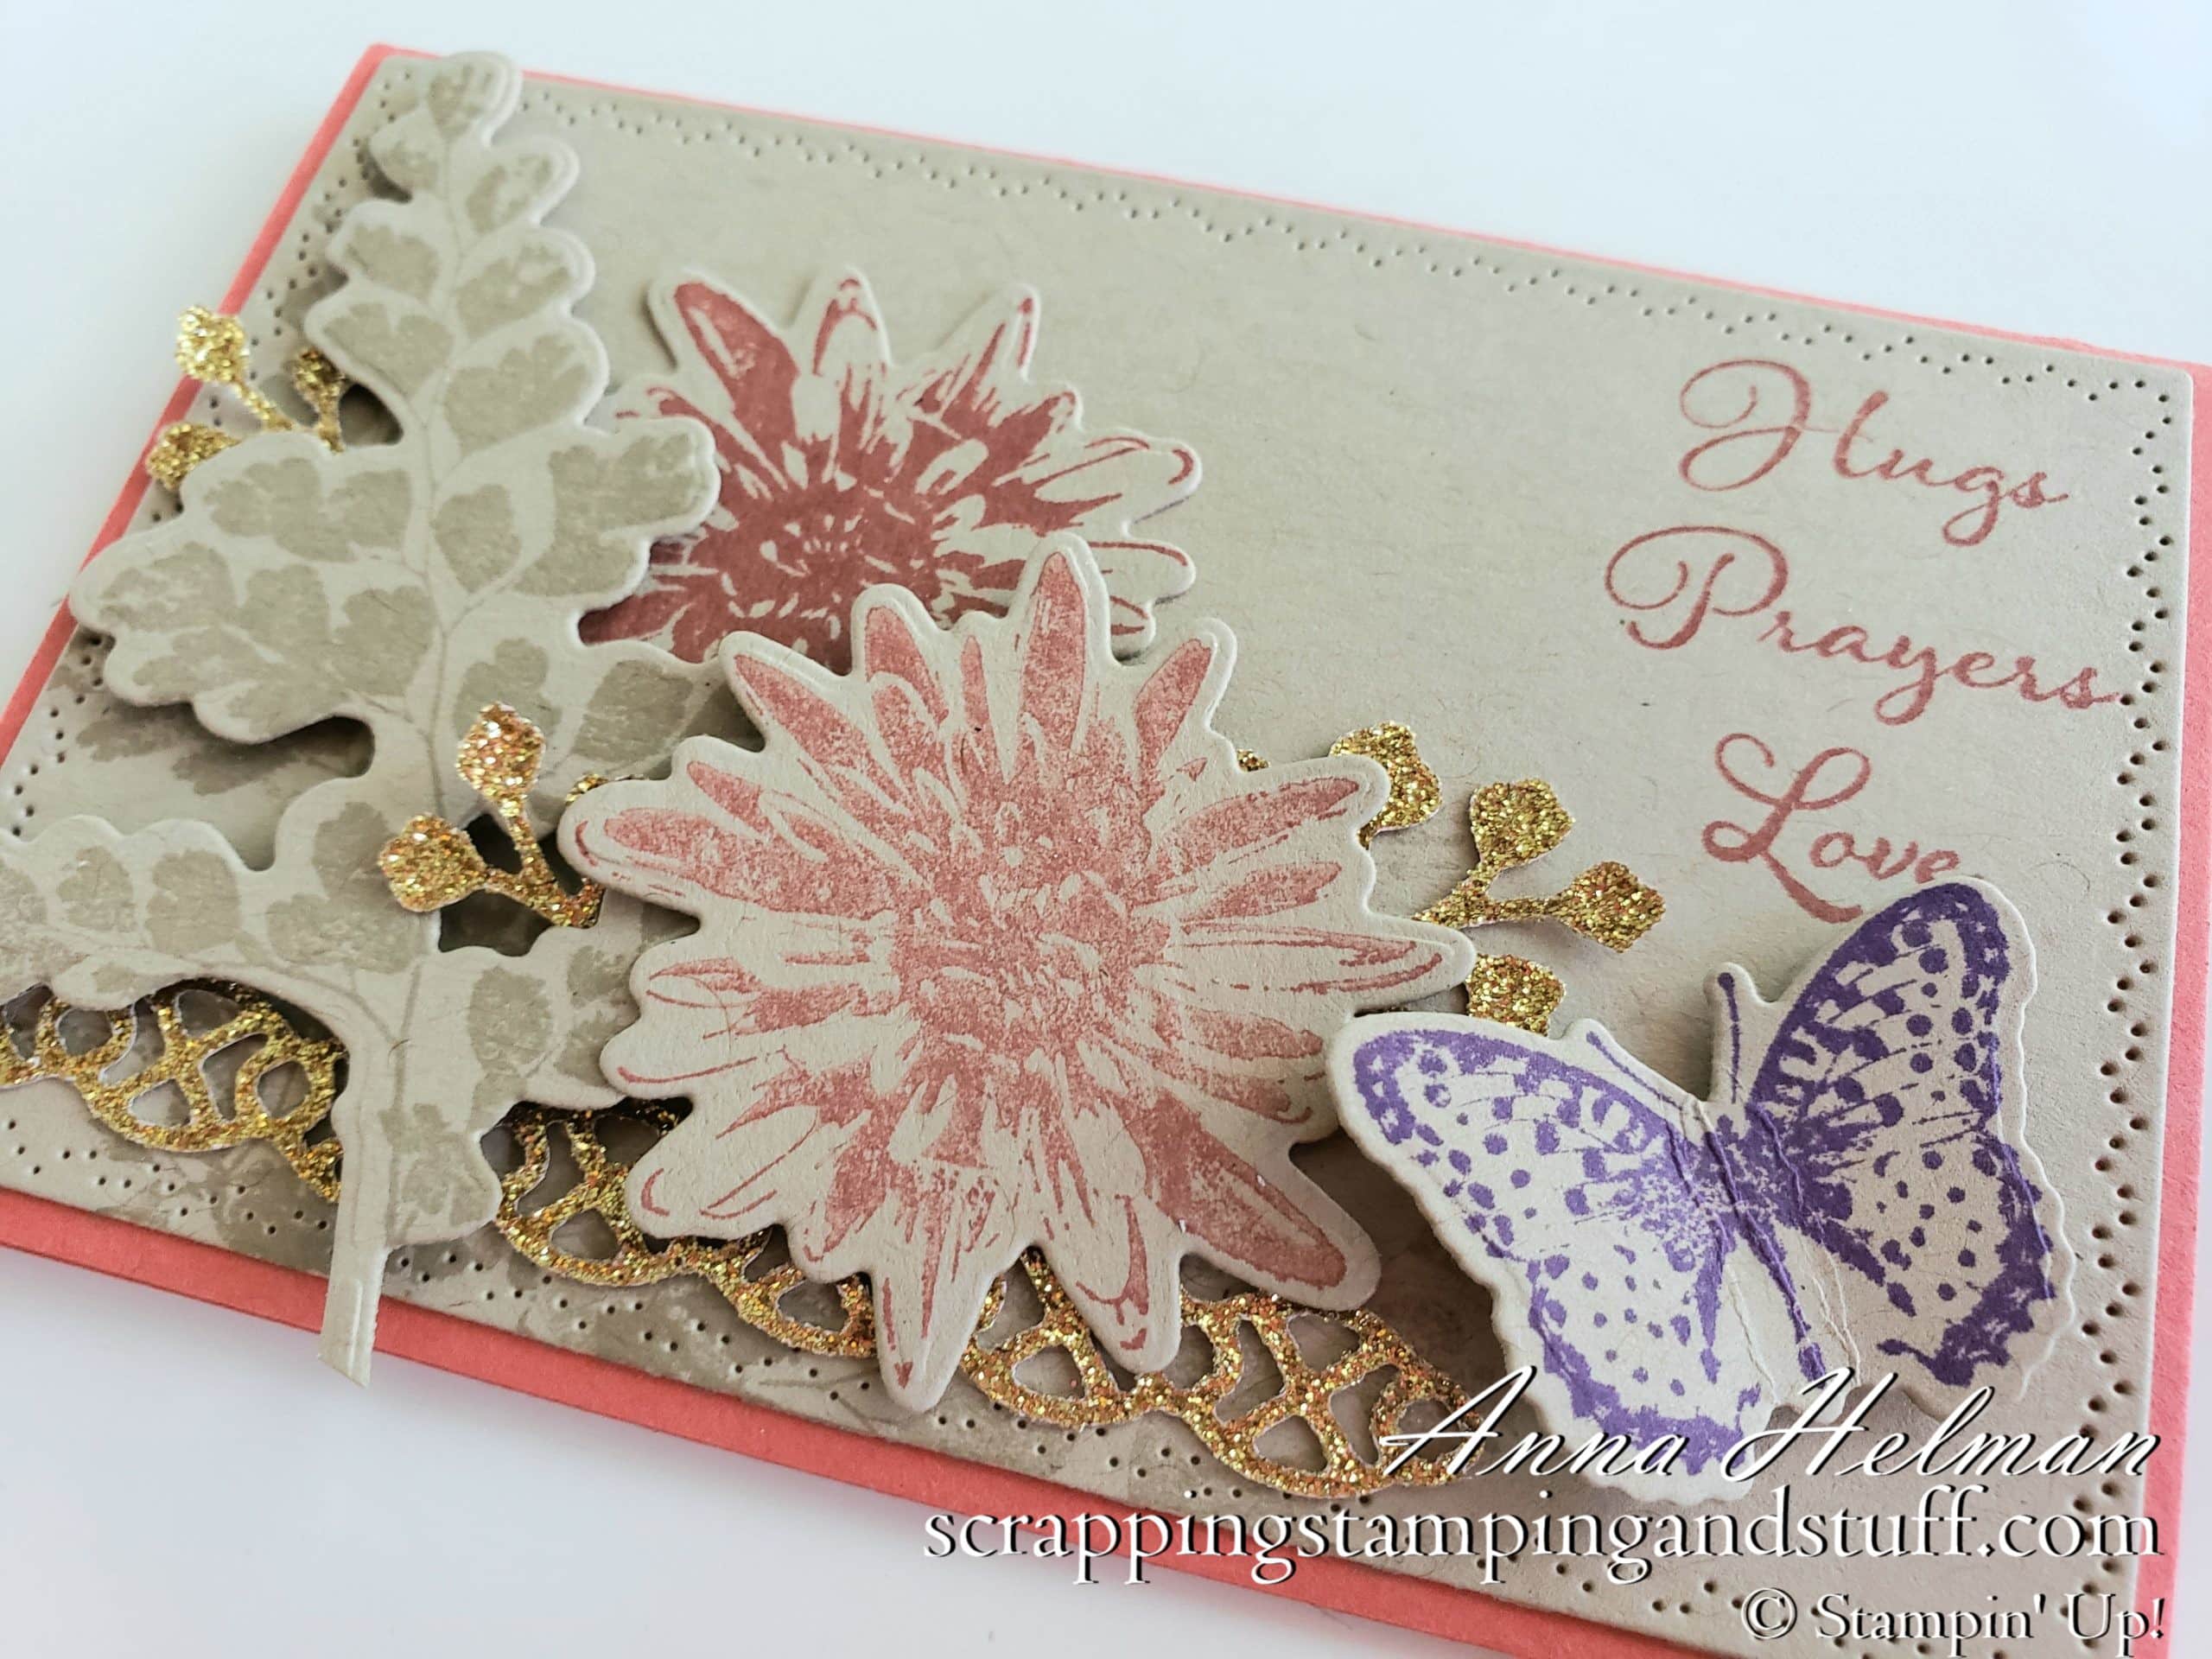 Stampin Up Positive Thoughts – A New Favorite!